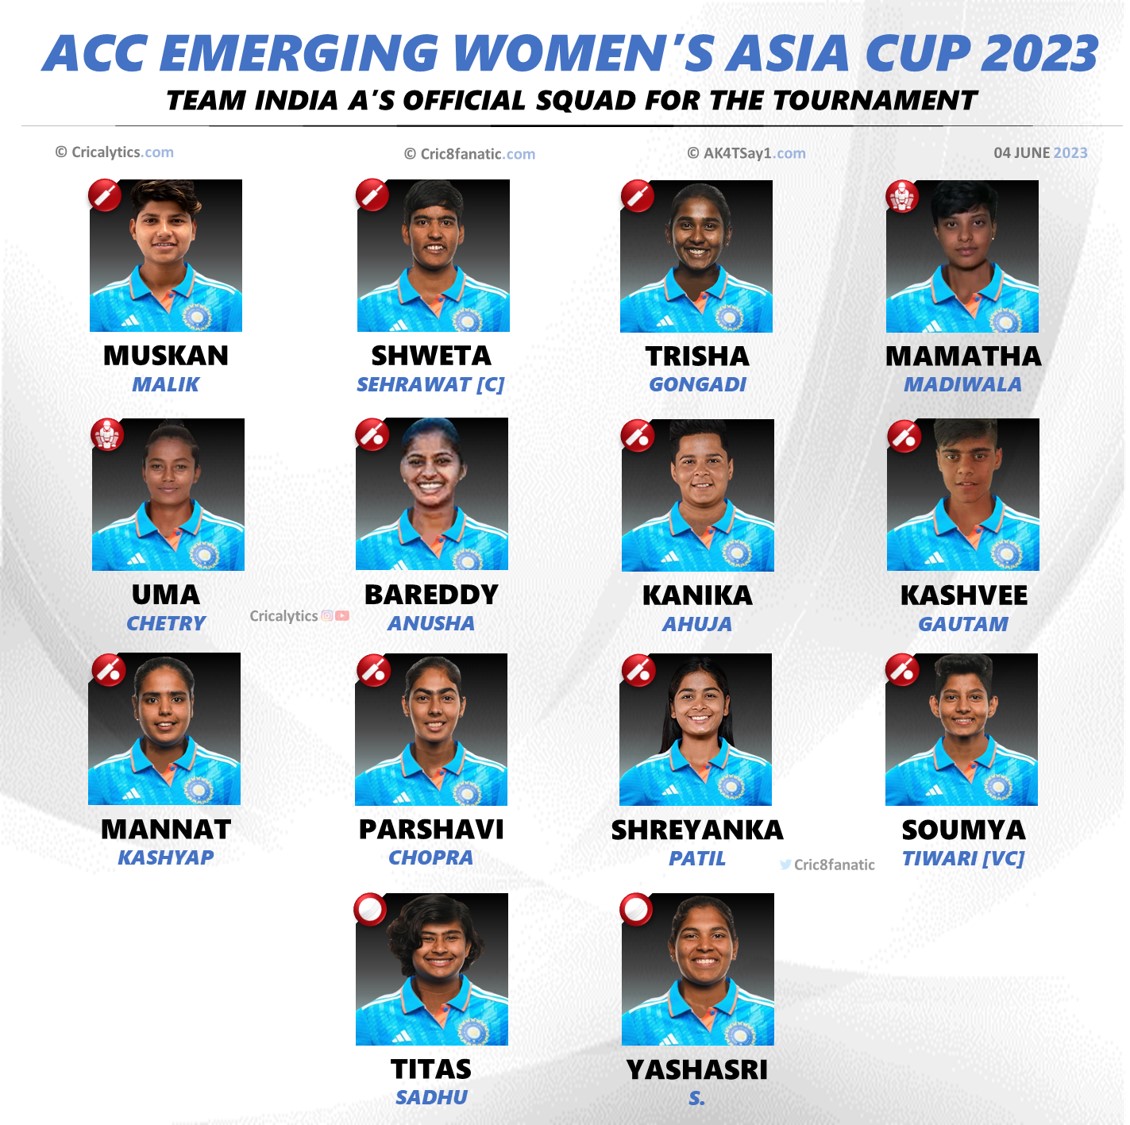 india a squad and players list emerging women's asia cup 2023